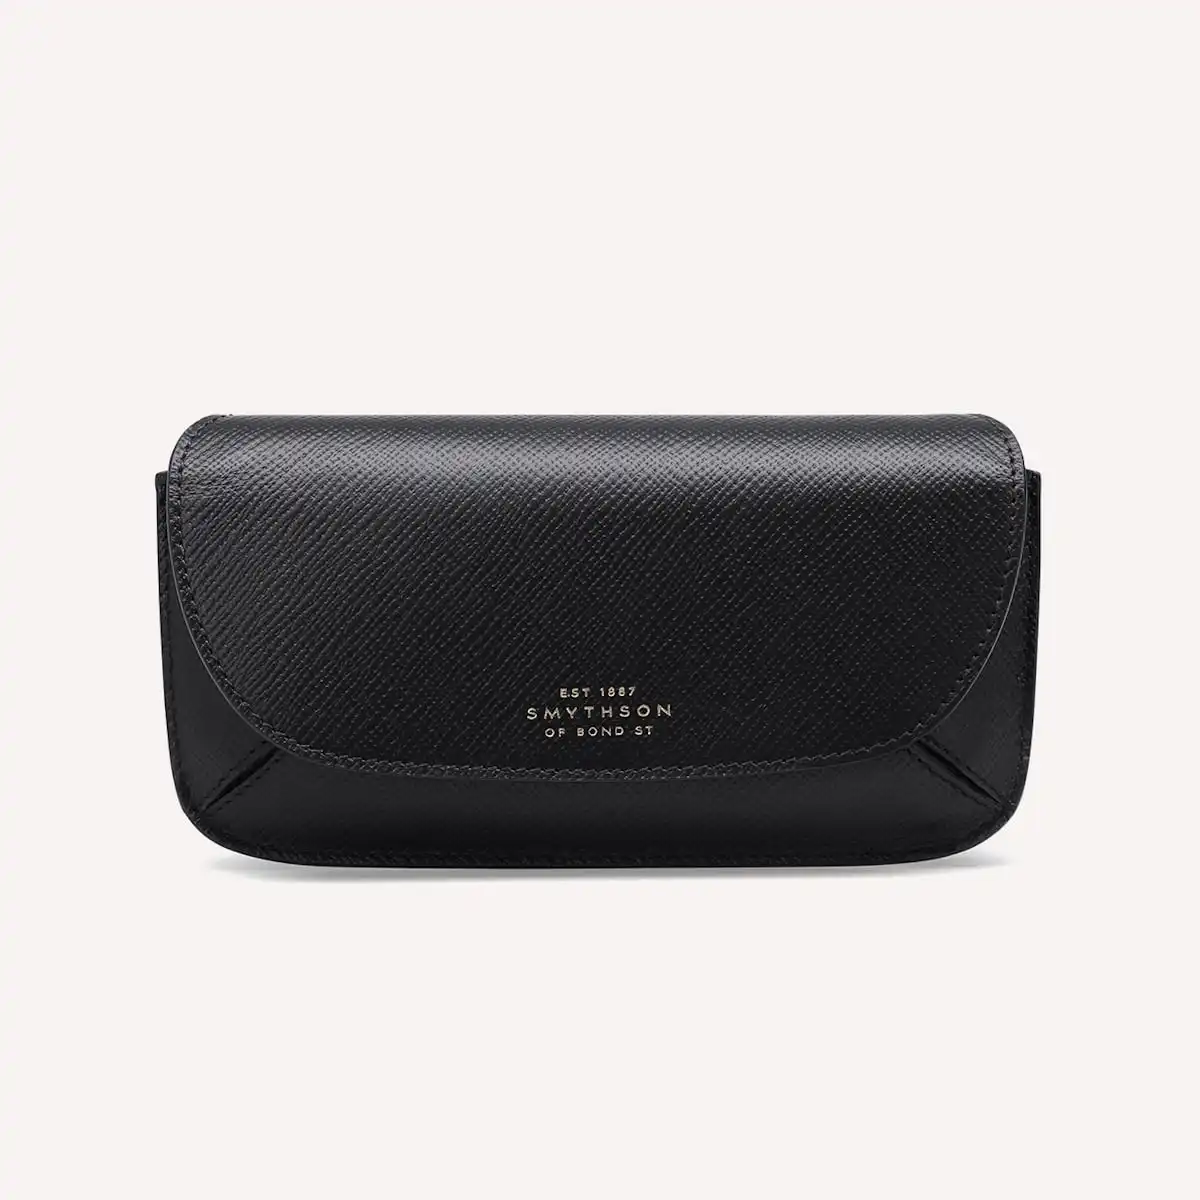 9 Glasses and Sunglasses Cases for EDC